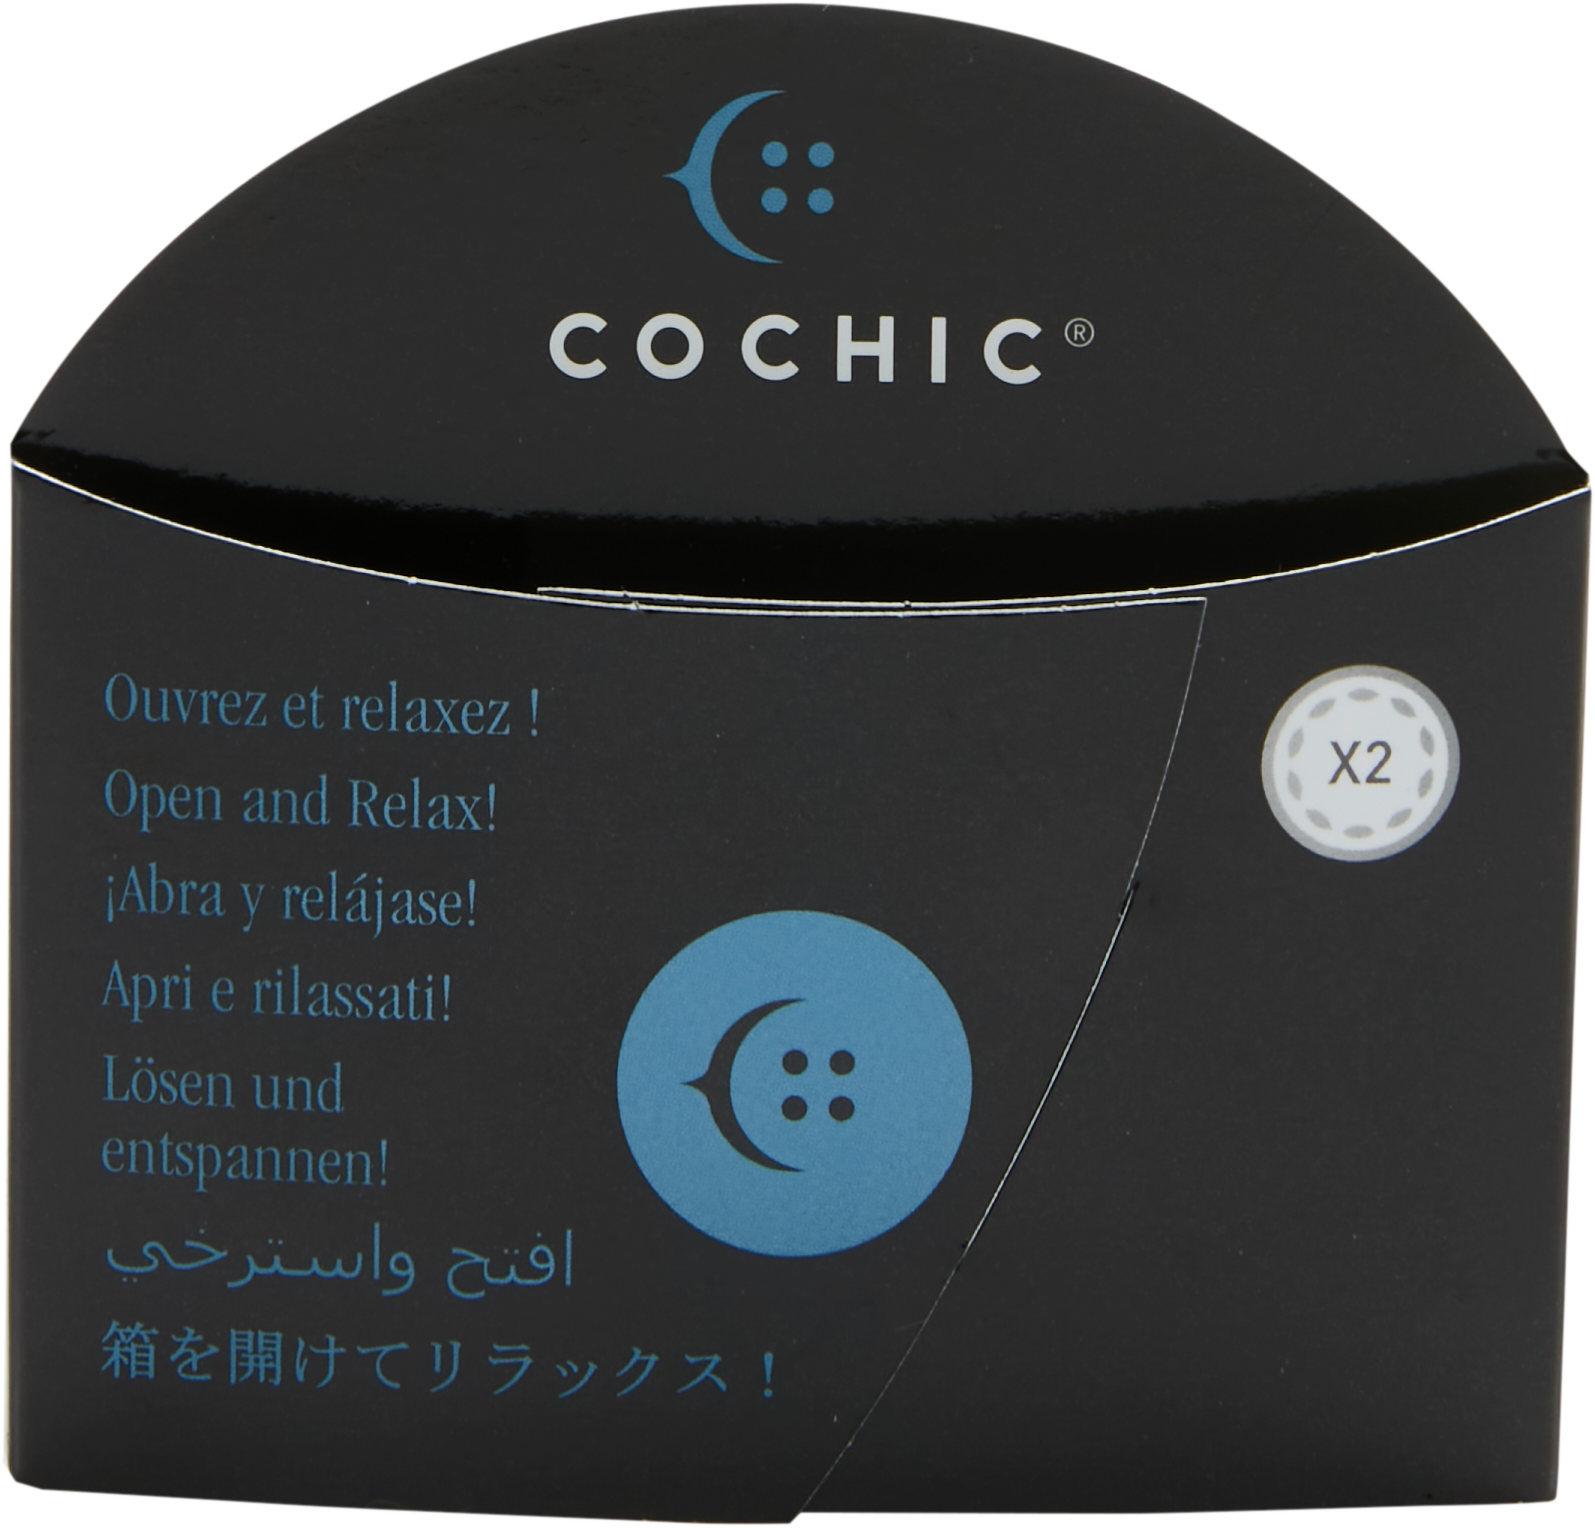 5 Reasons You NEED a COCHIC Collar Extender